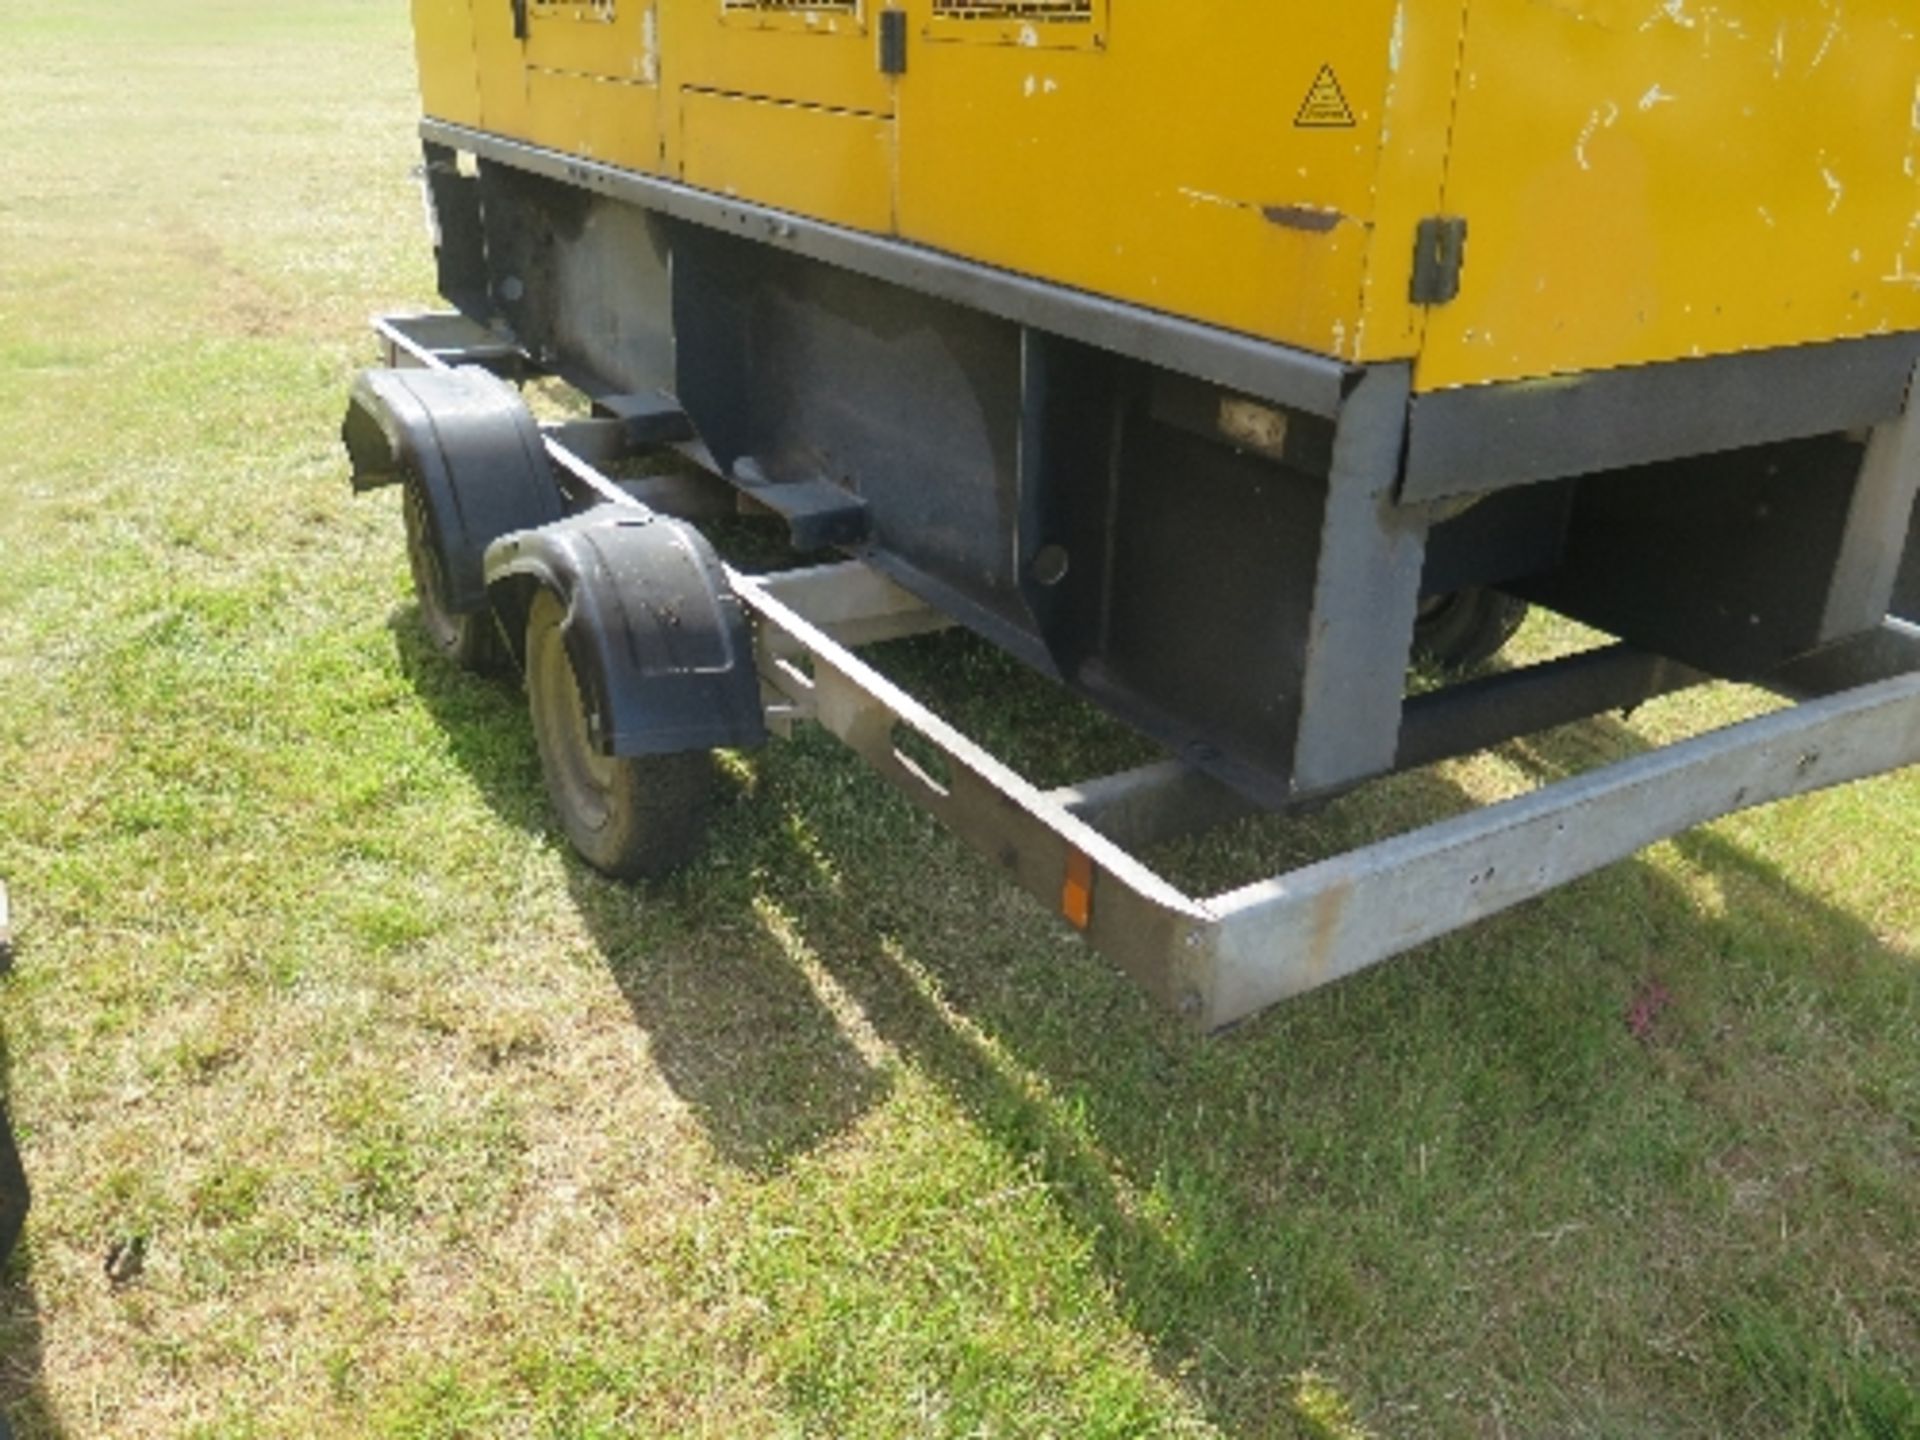 Caterpillar XQE100 trailer mounted generator 22493 hrs 138829
PERKINS - RUNS AND MAKES POWER
ALL - Image 5 of 8